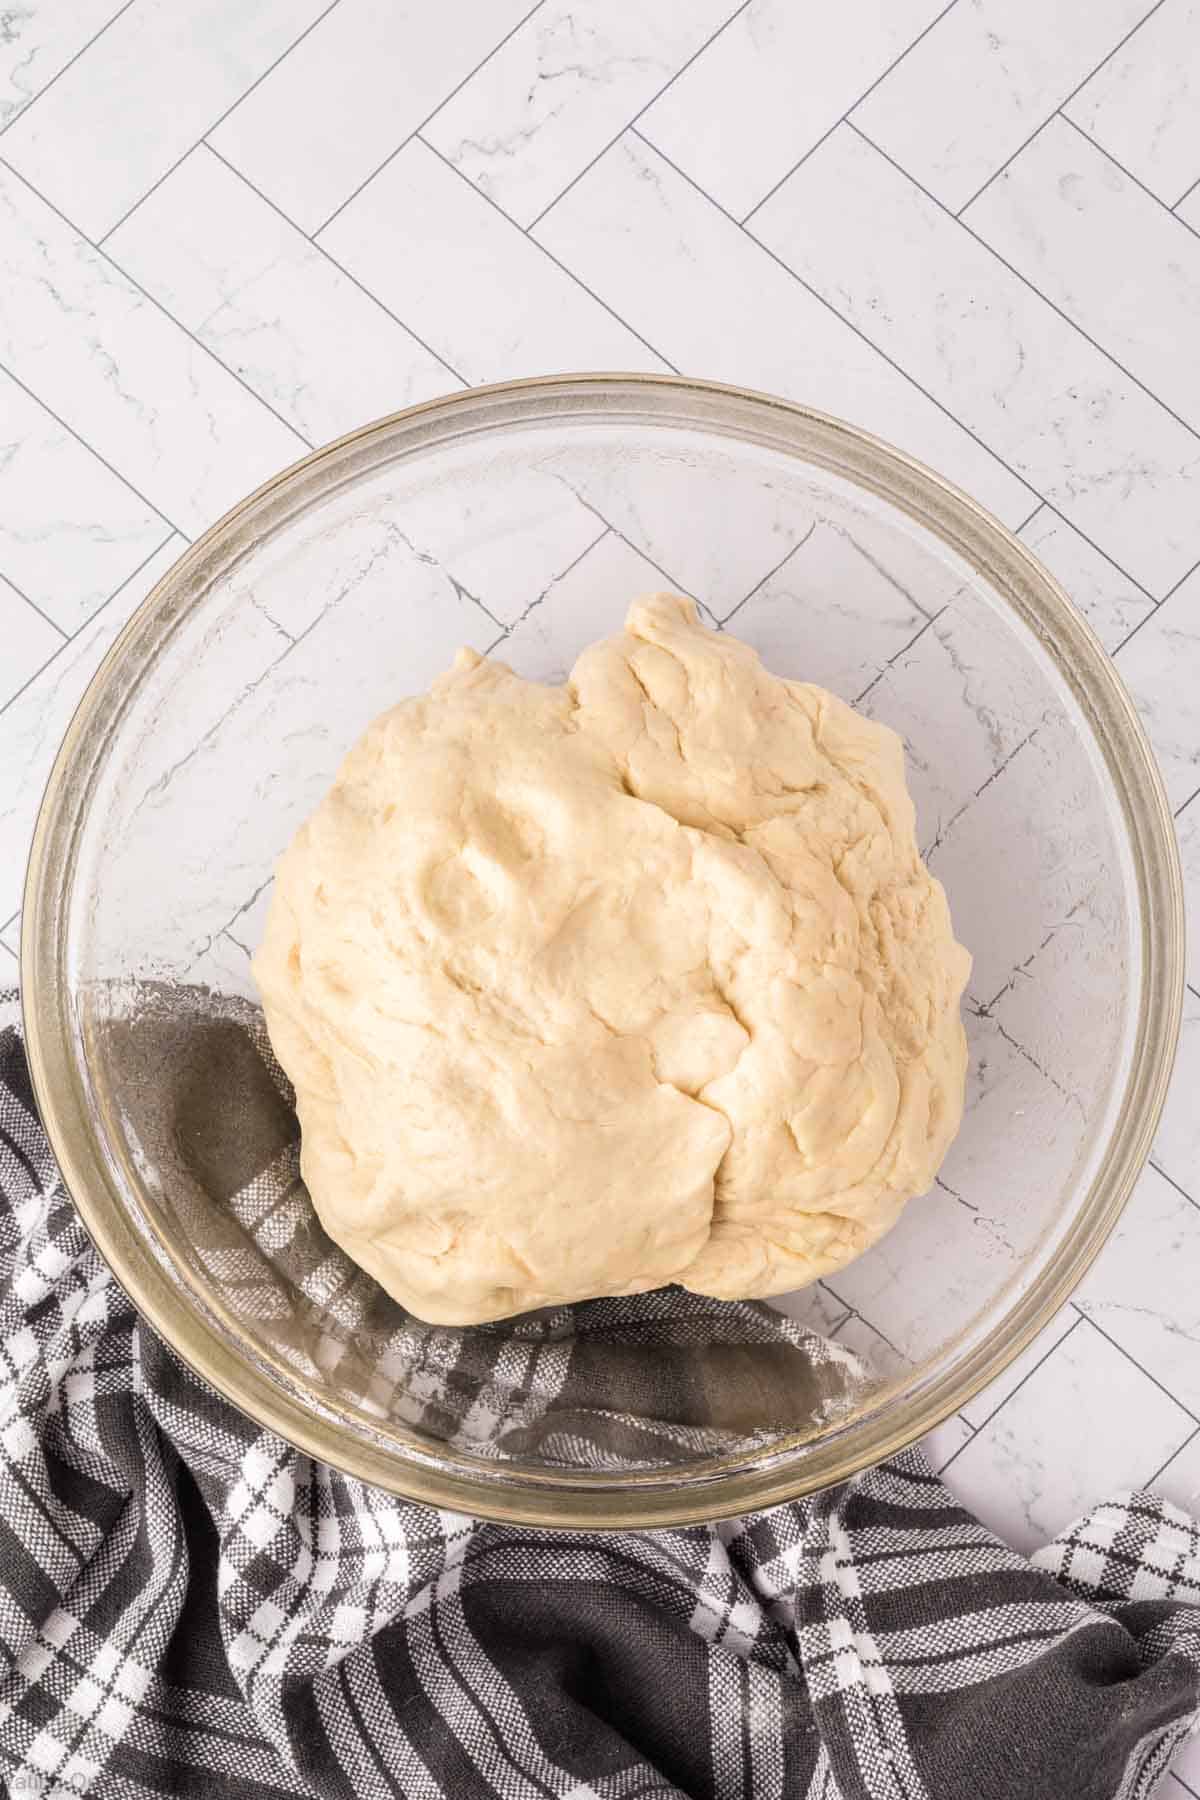 Kneading dough in a bowl